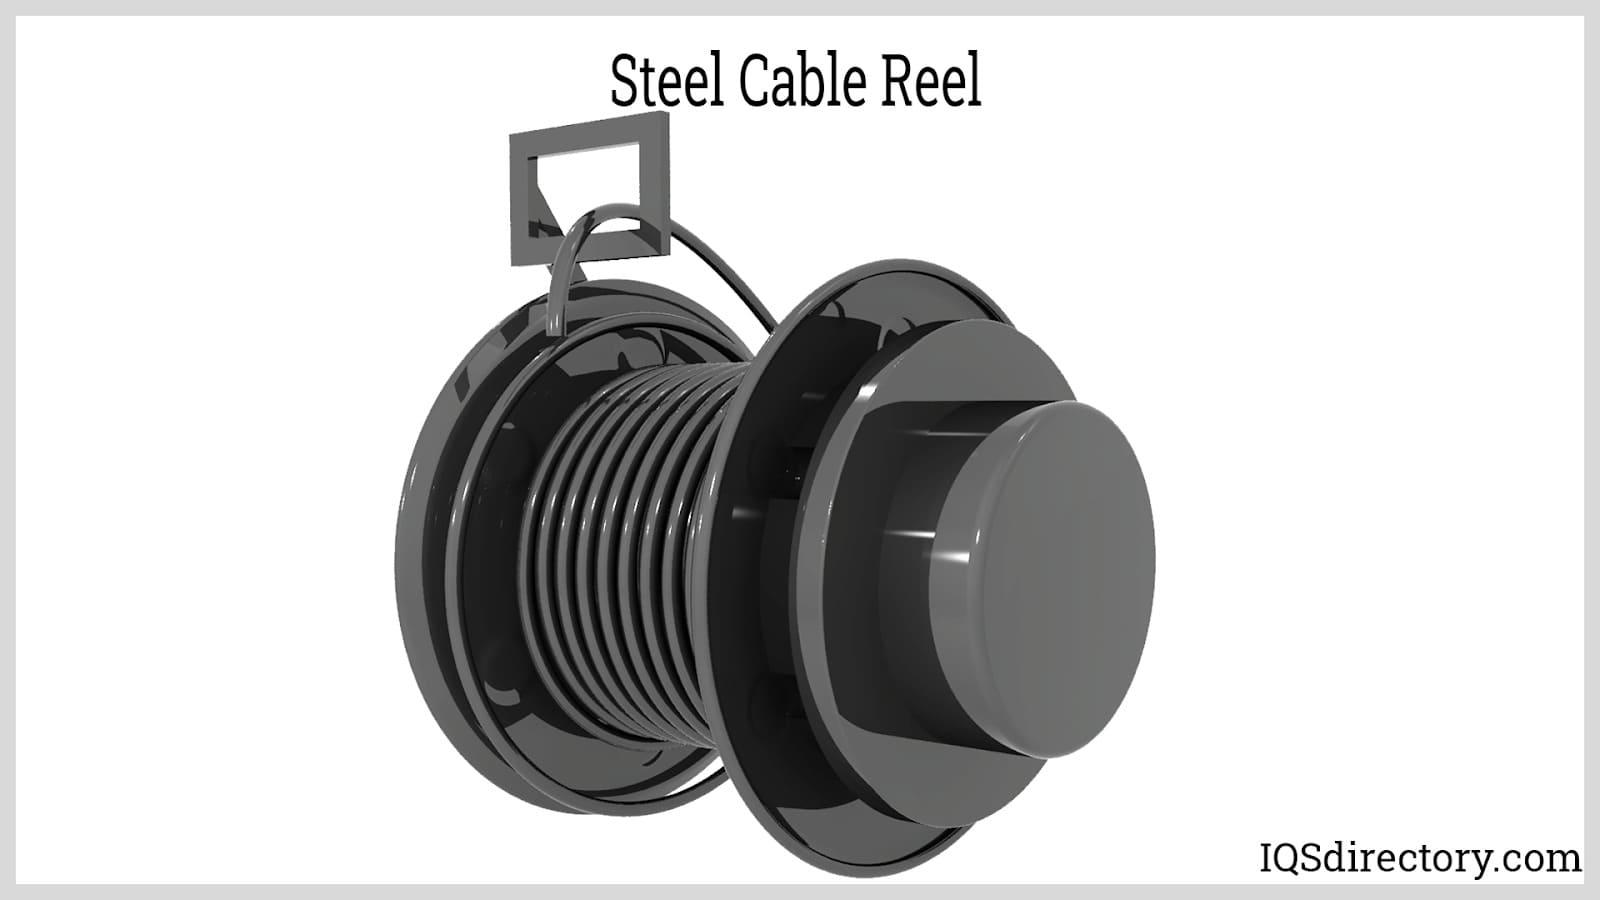 Steel Cable Reel